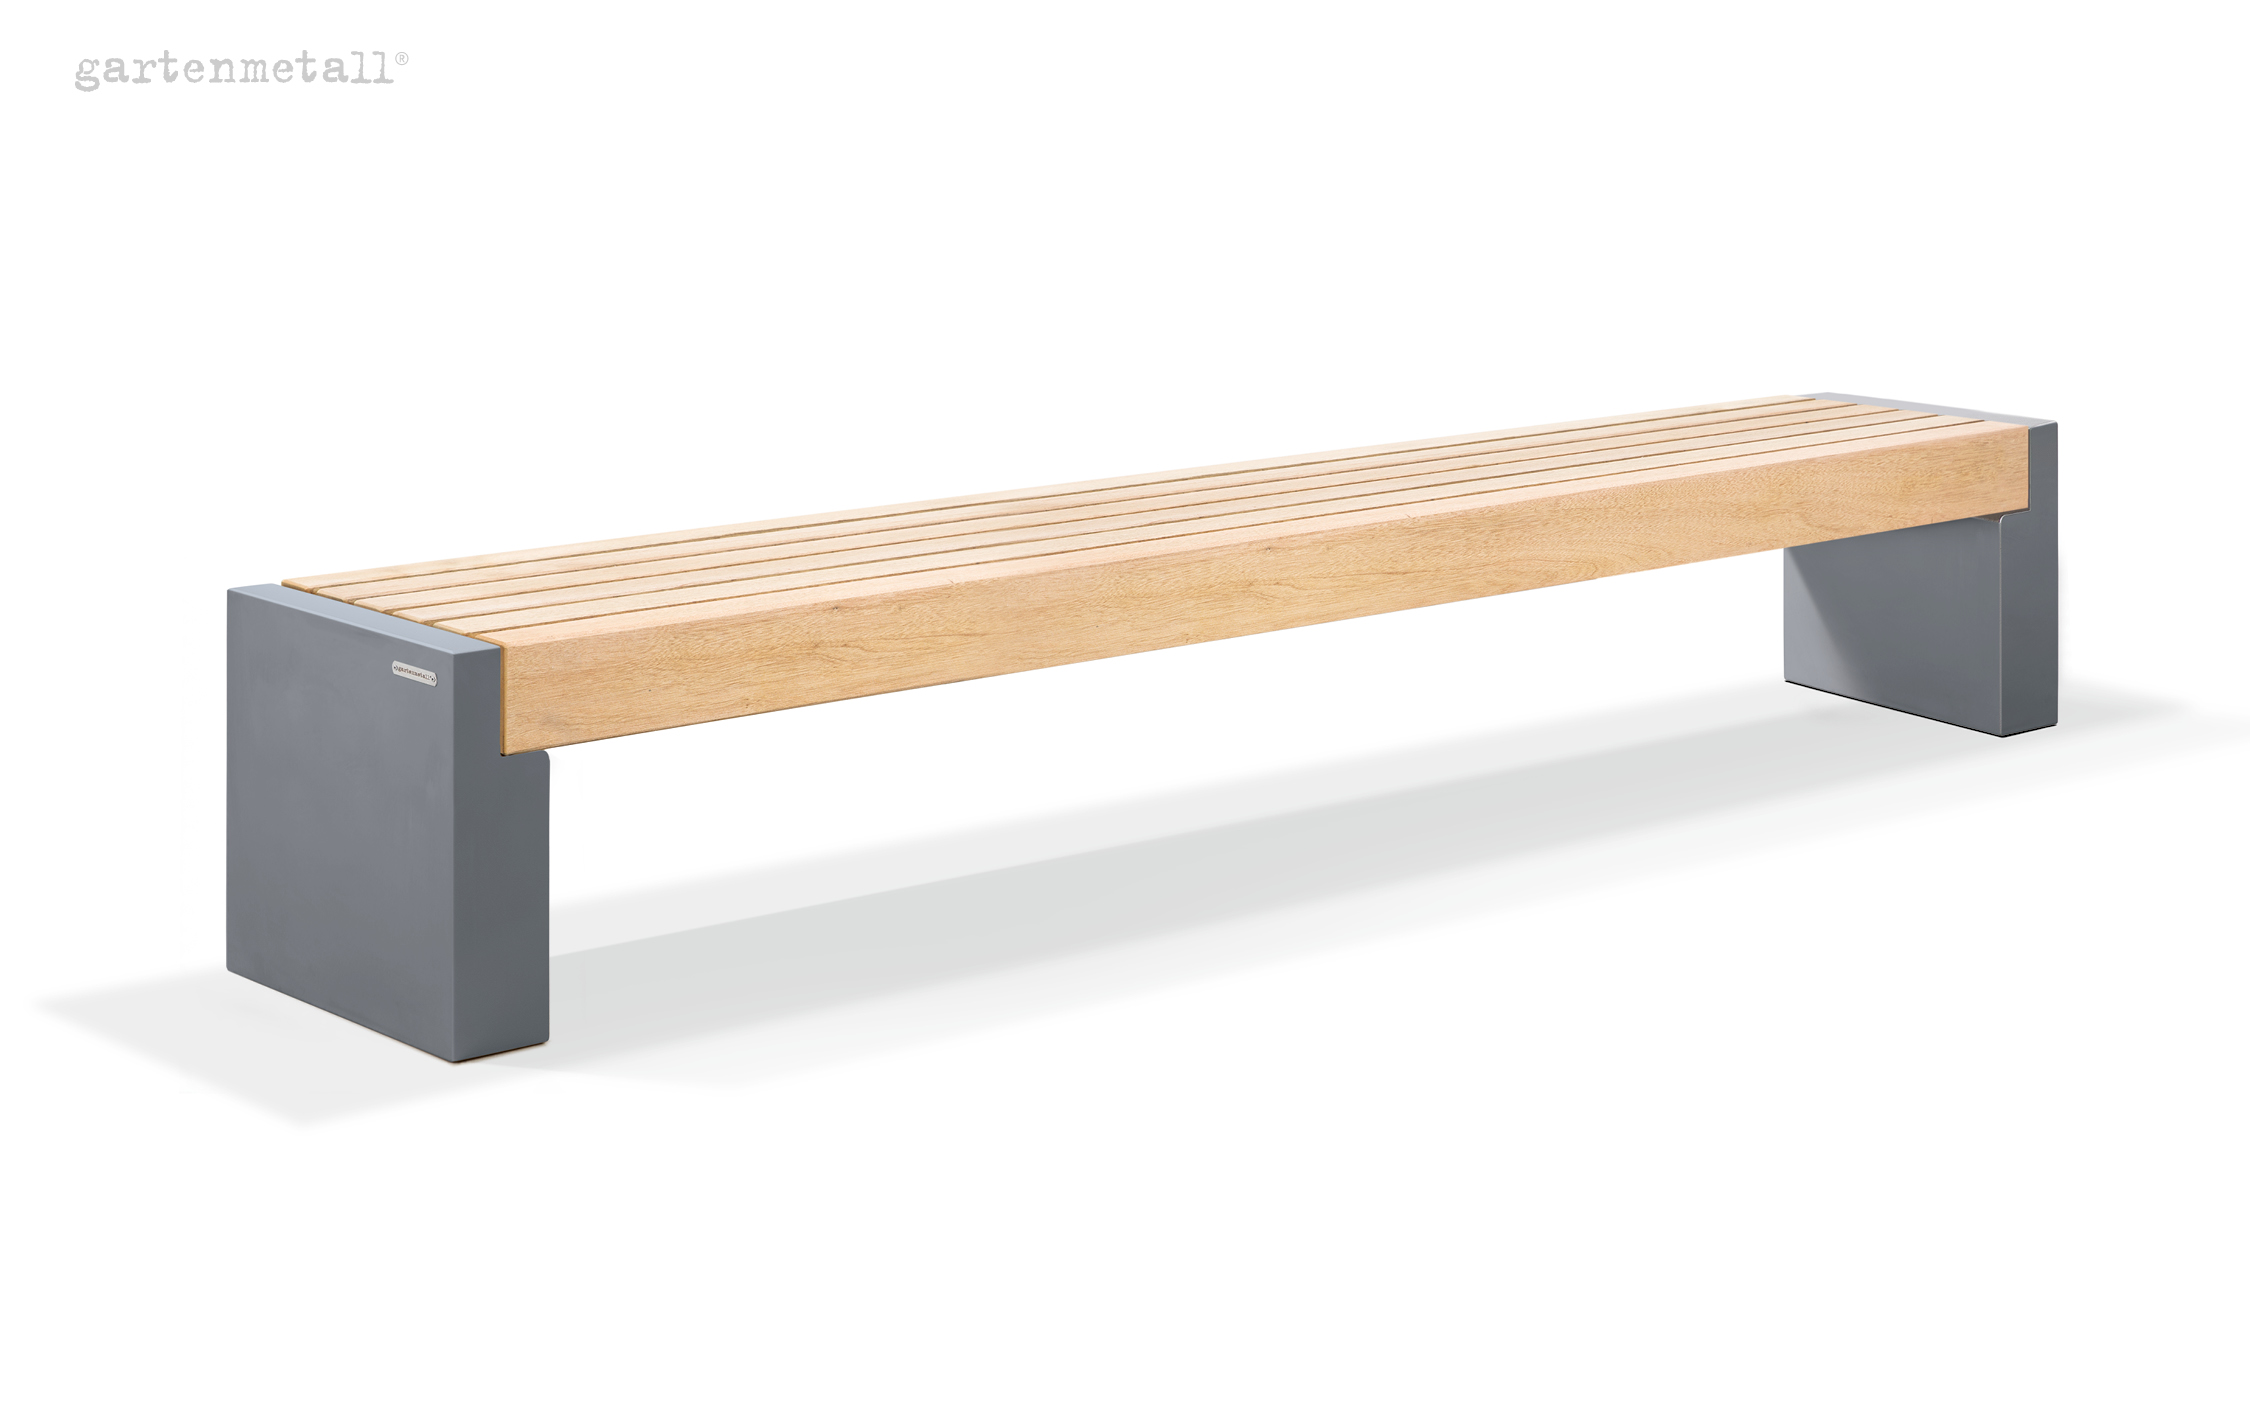 Bench type EMDEN 3.0 m with seat support hardwood